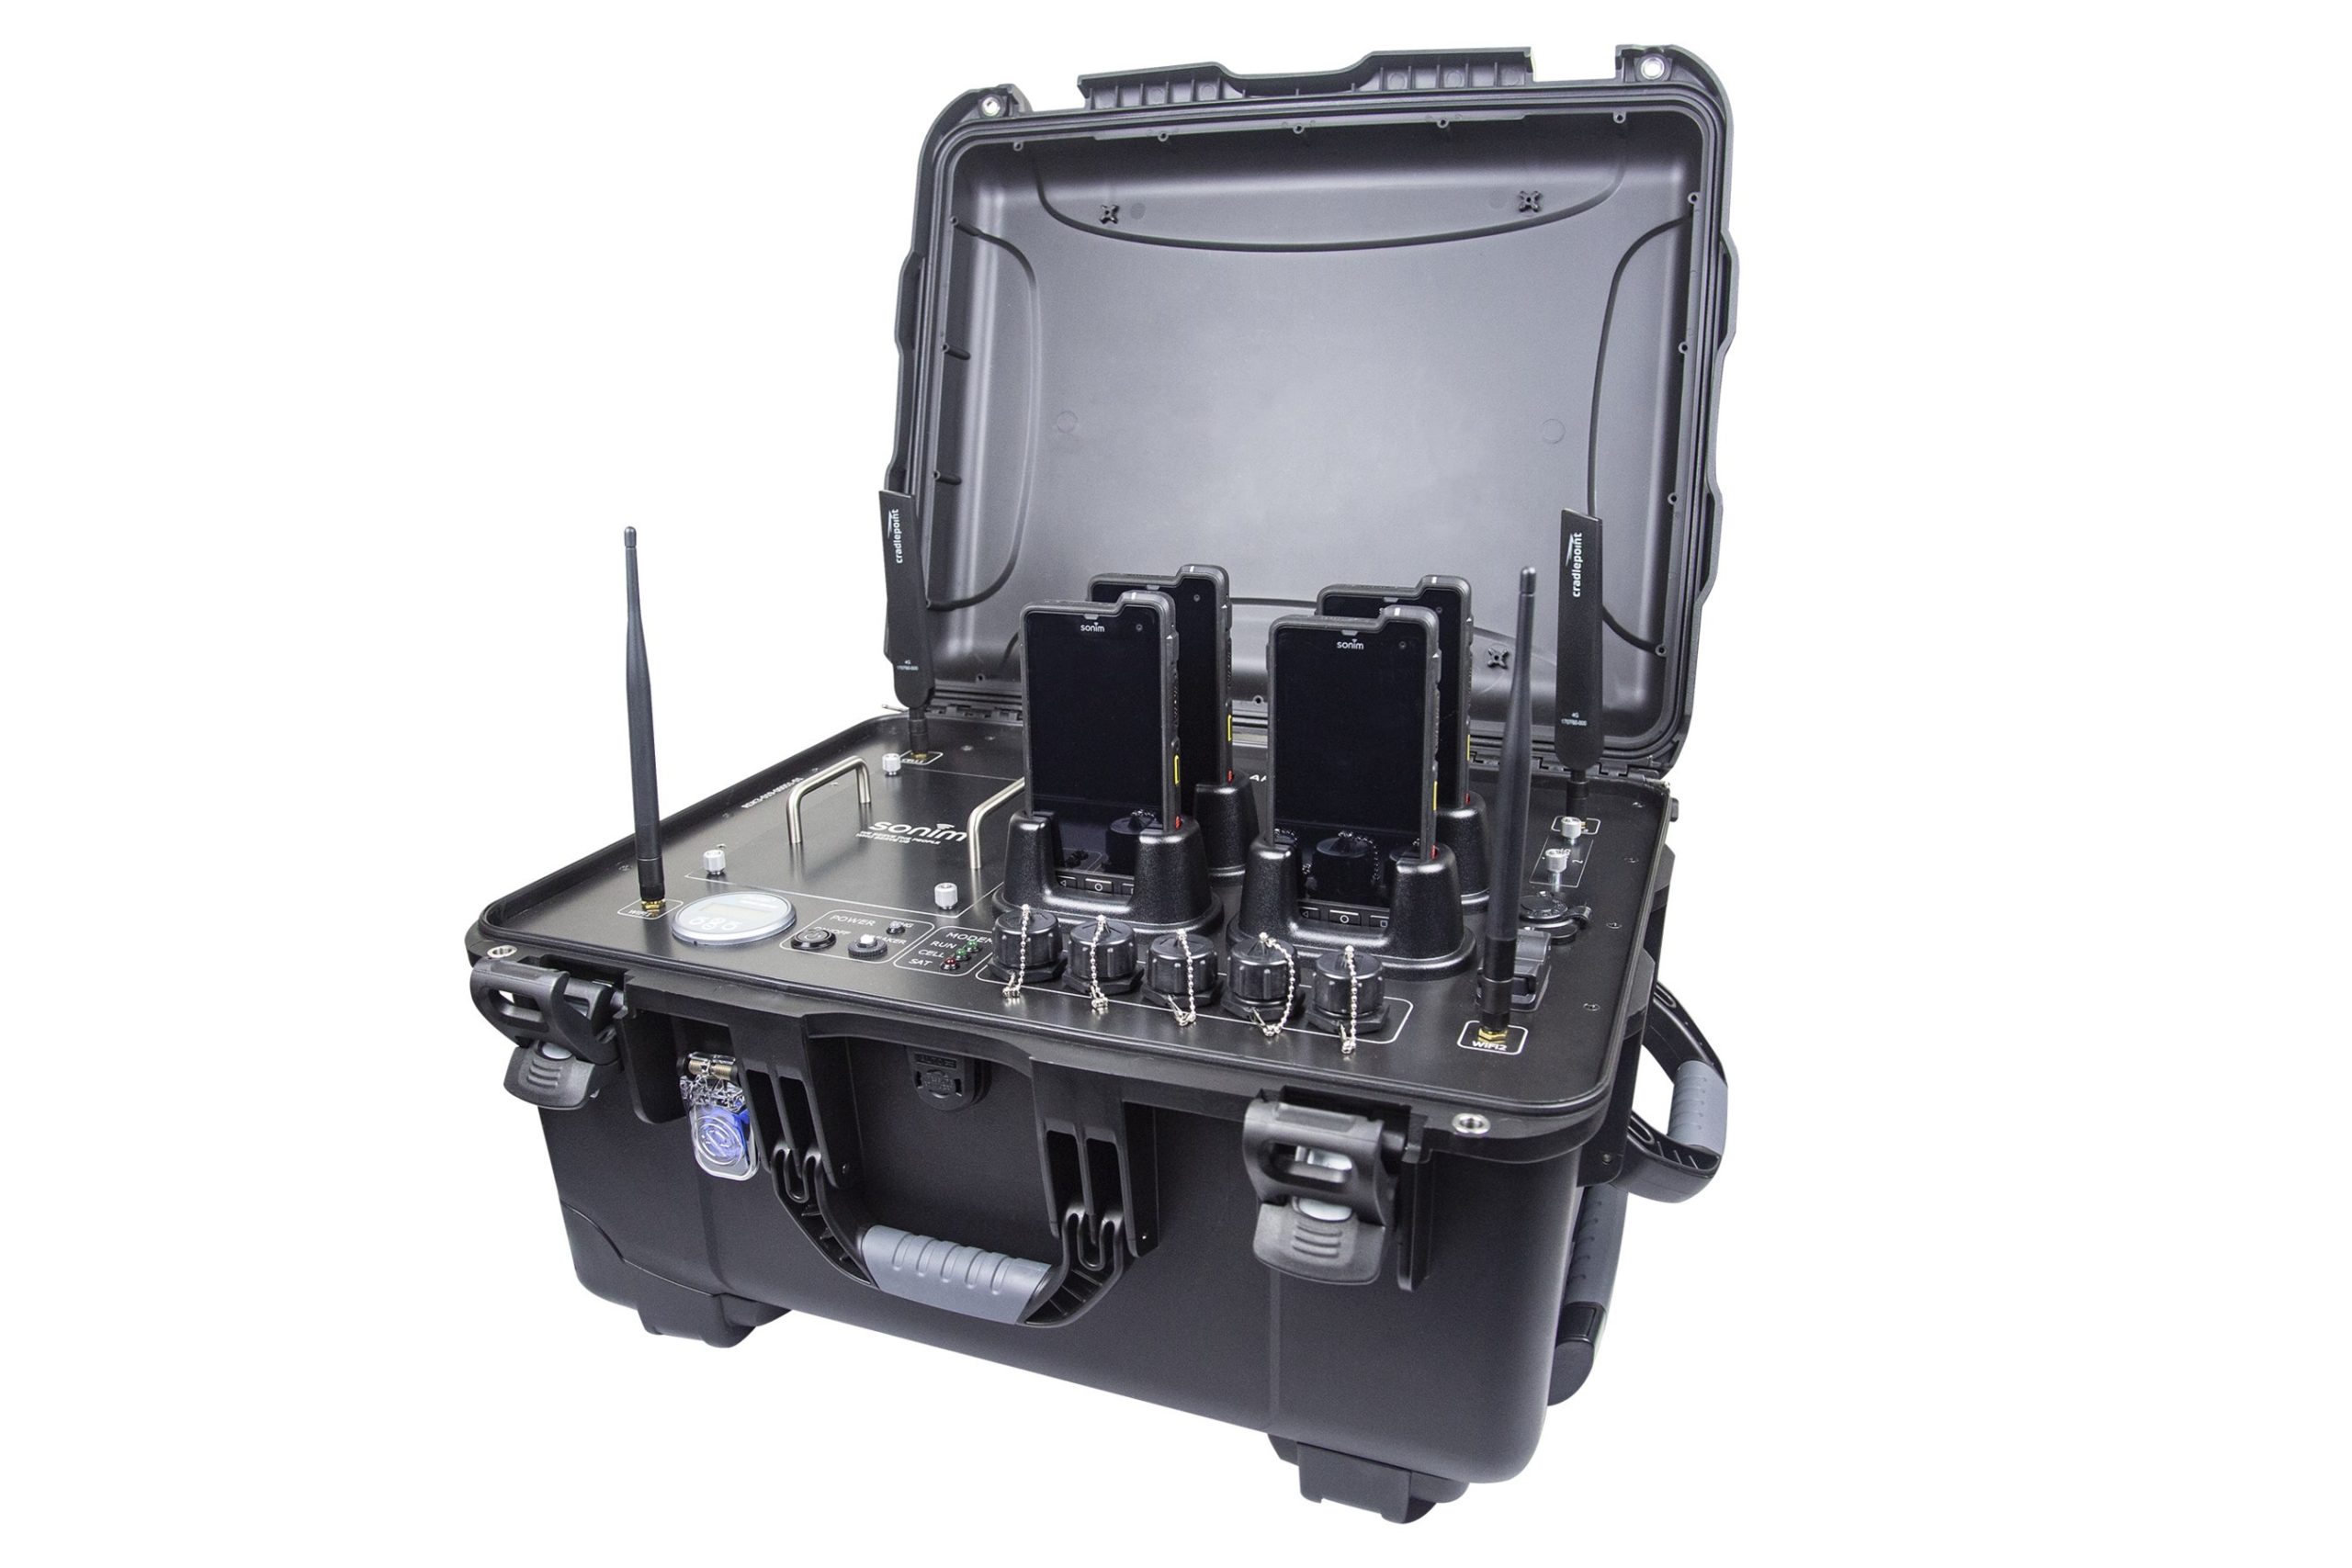 Sonim Launches Ultra-Rugged Rapid Deployment Kit for Portable Communication Systems